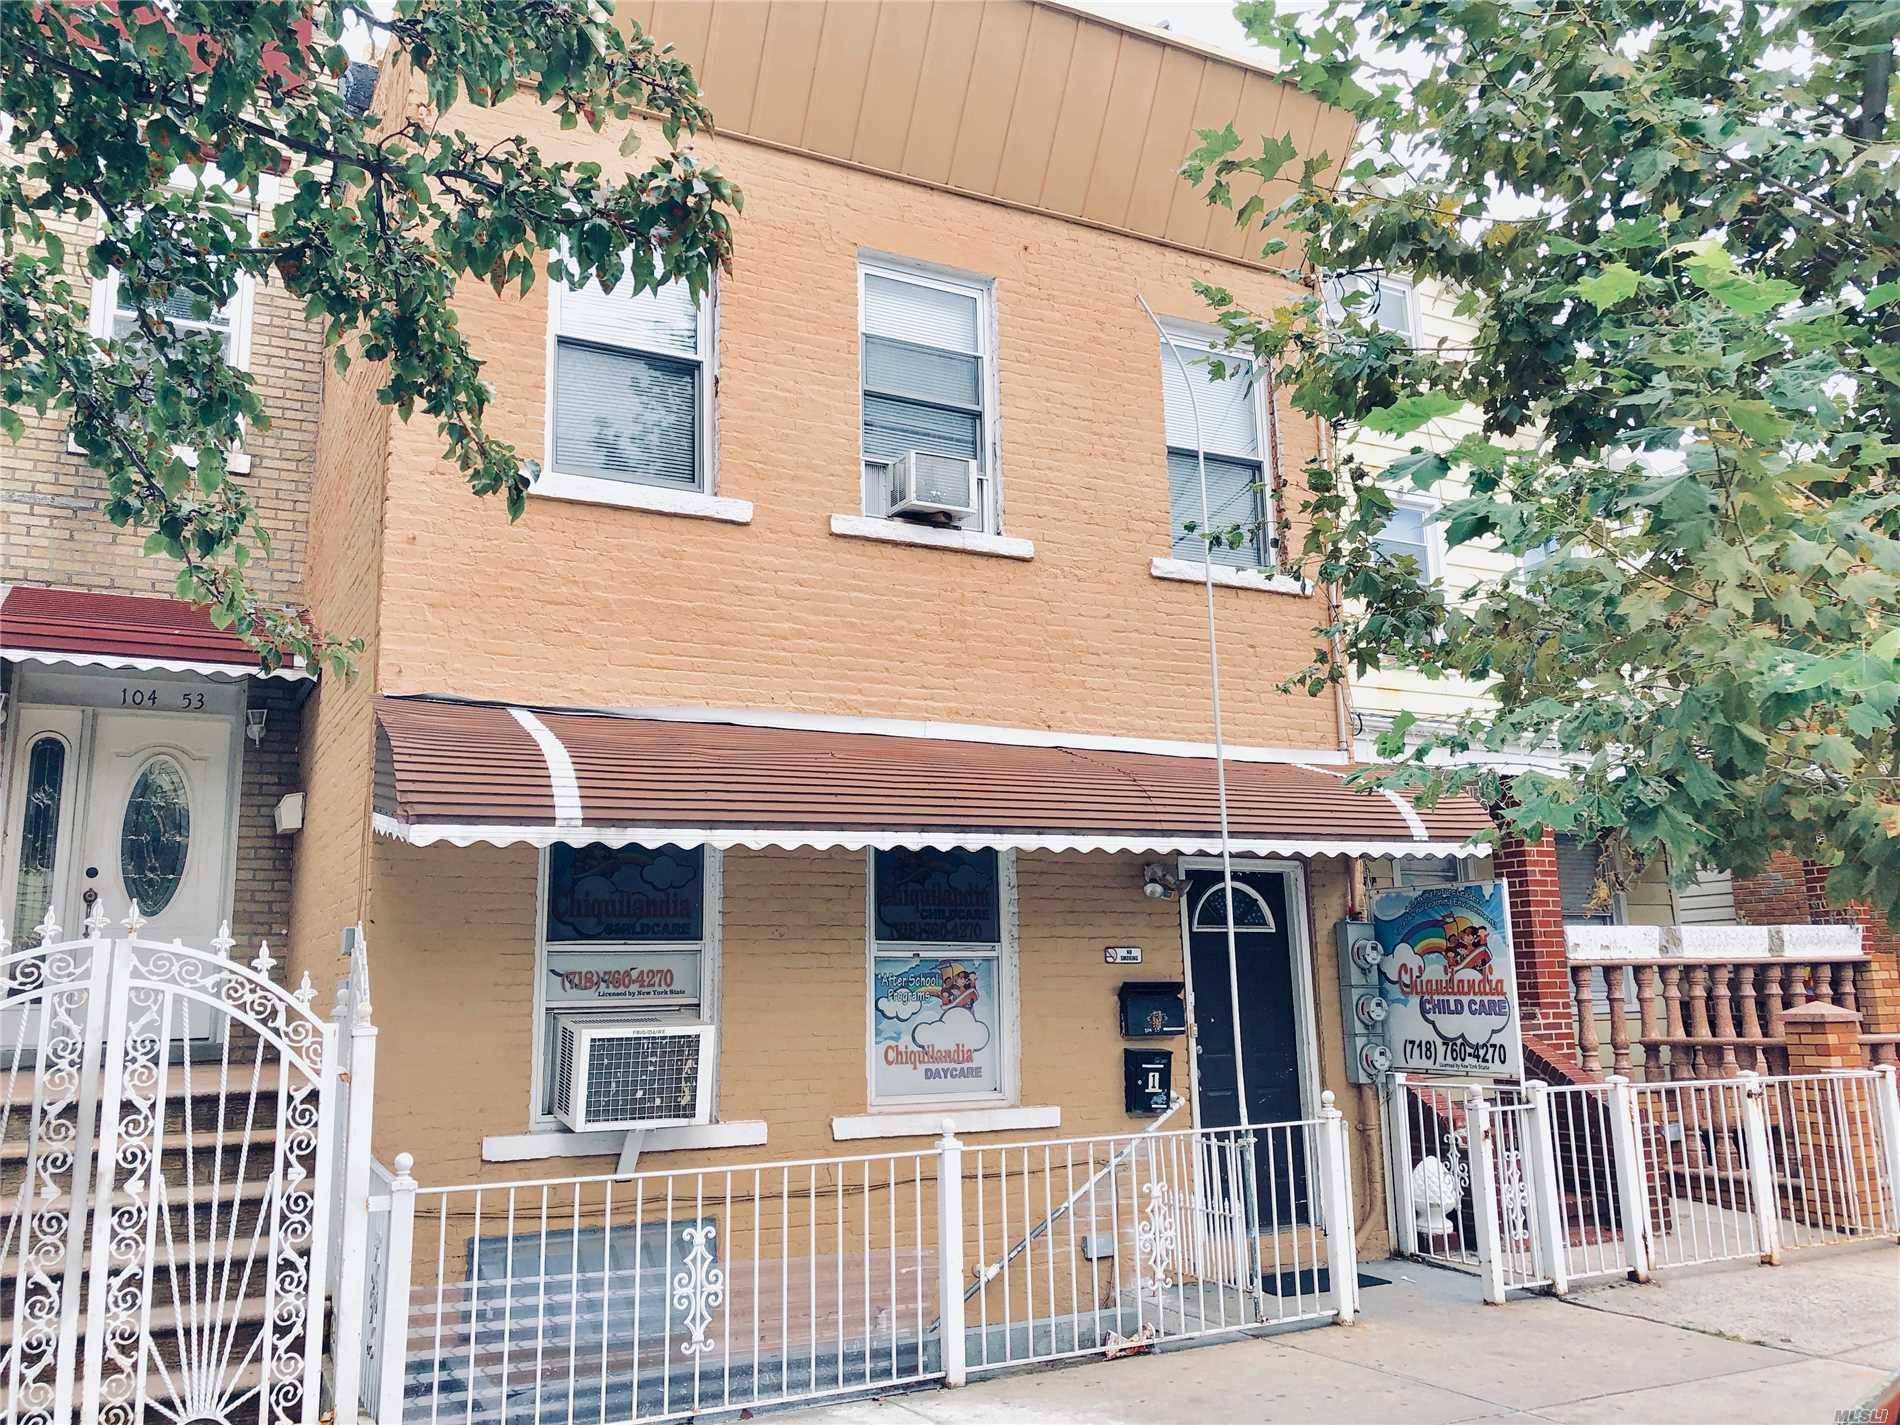 Wonderful Two Family Attached Brick Townhouse Located In Corona, Just A Few Blocks To 103rd St.